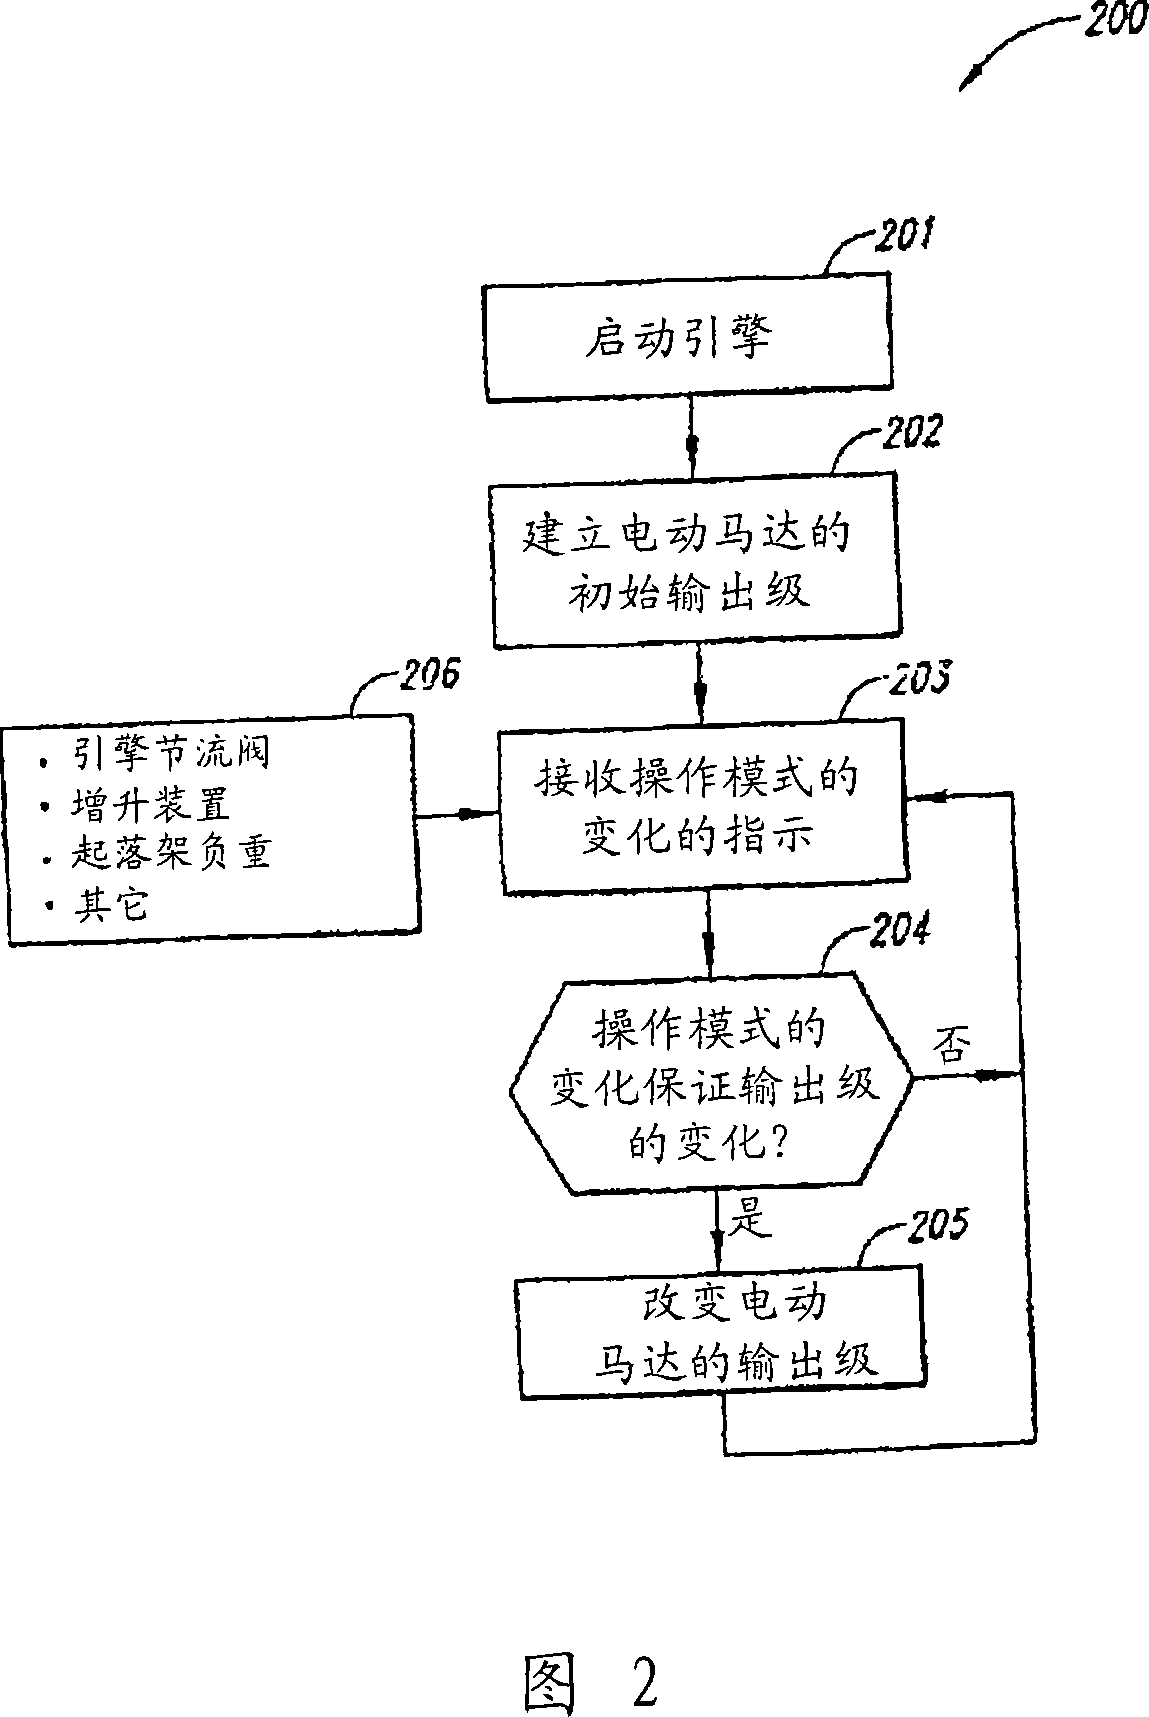 Systems and methods for controlling aricraft electrical power